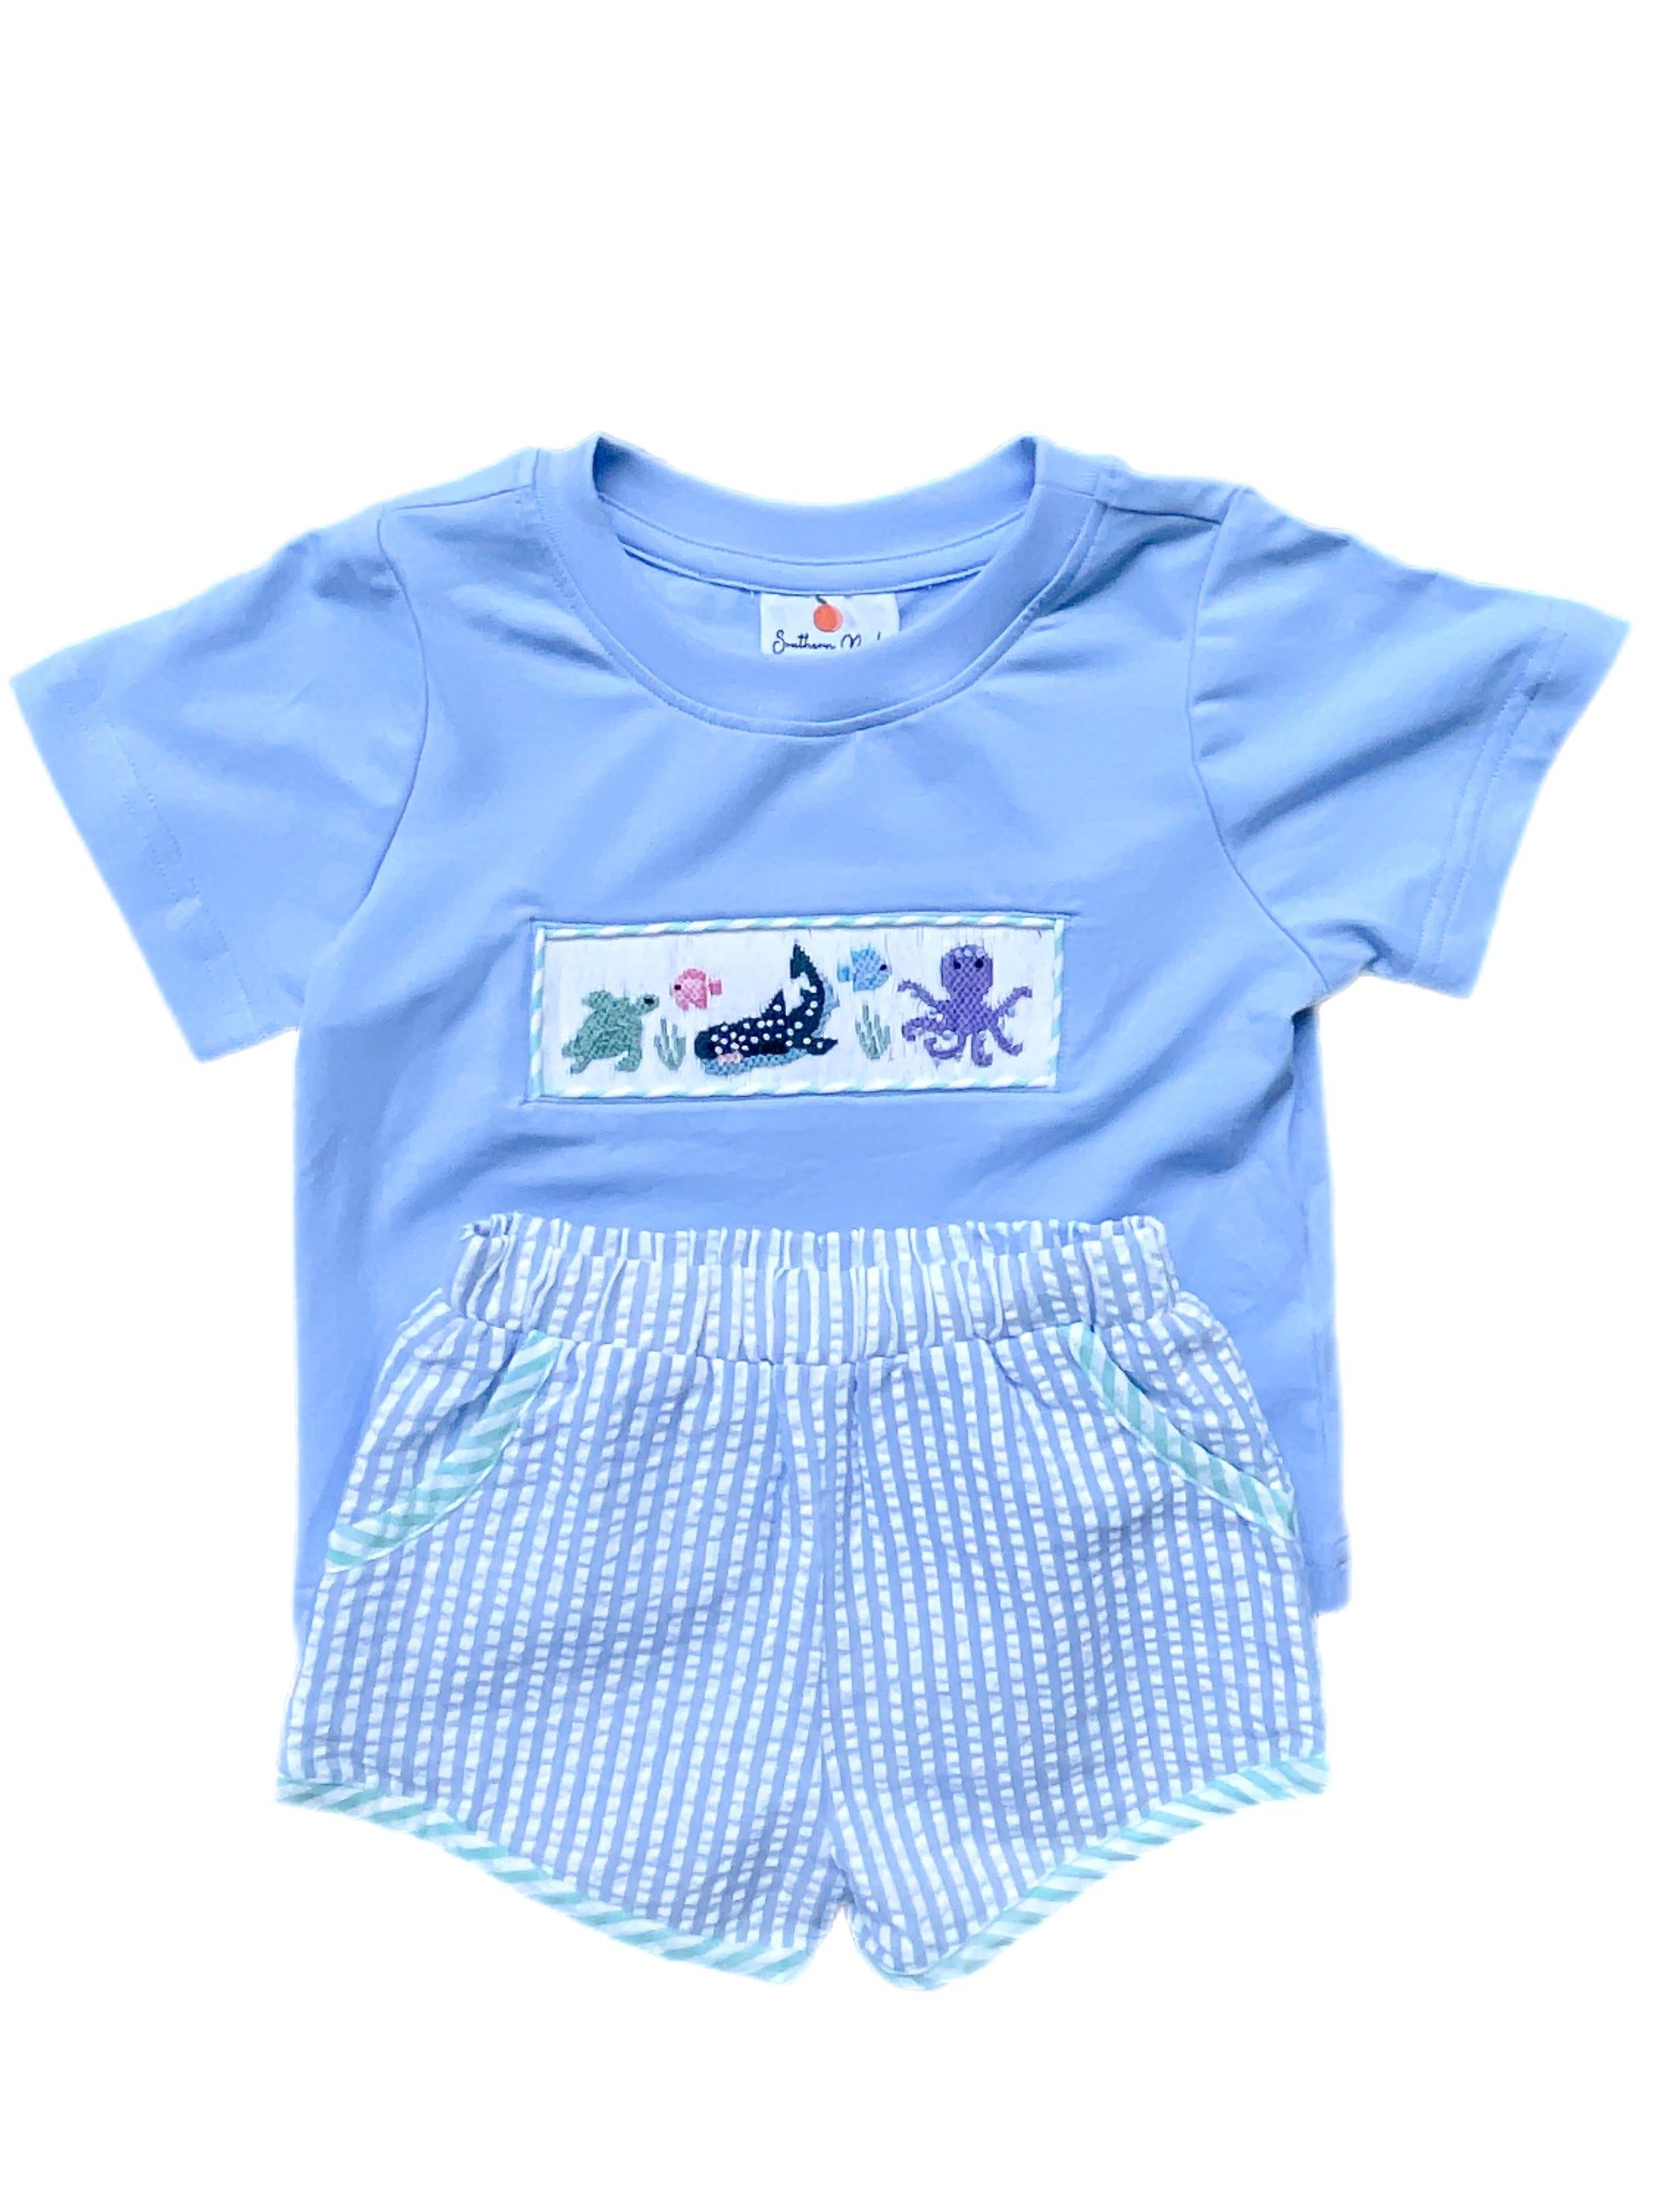 smocked aquarium outfit for toddler boys southern peach smocks